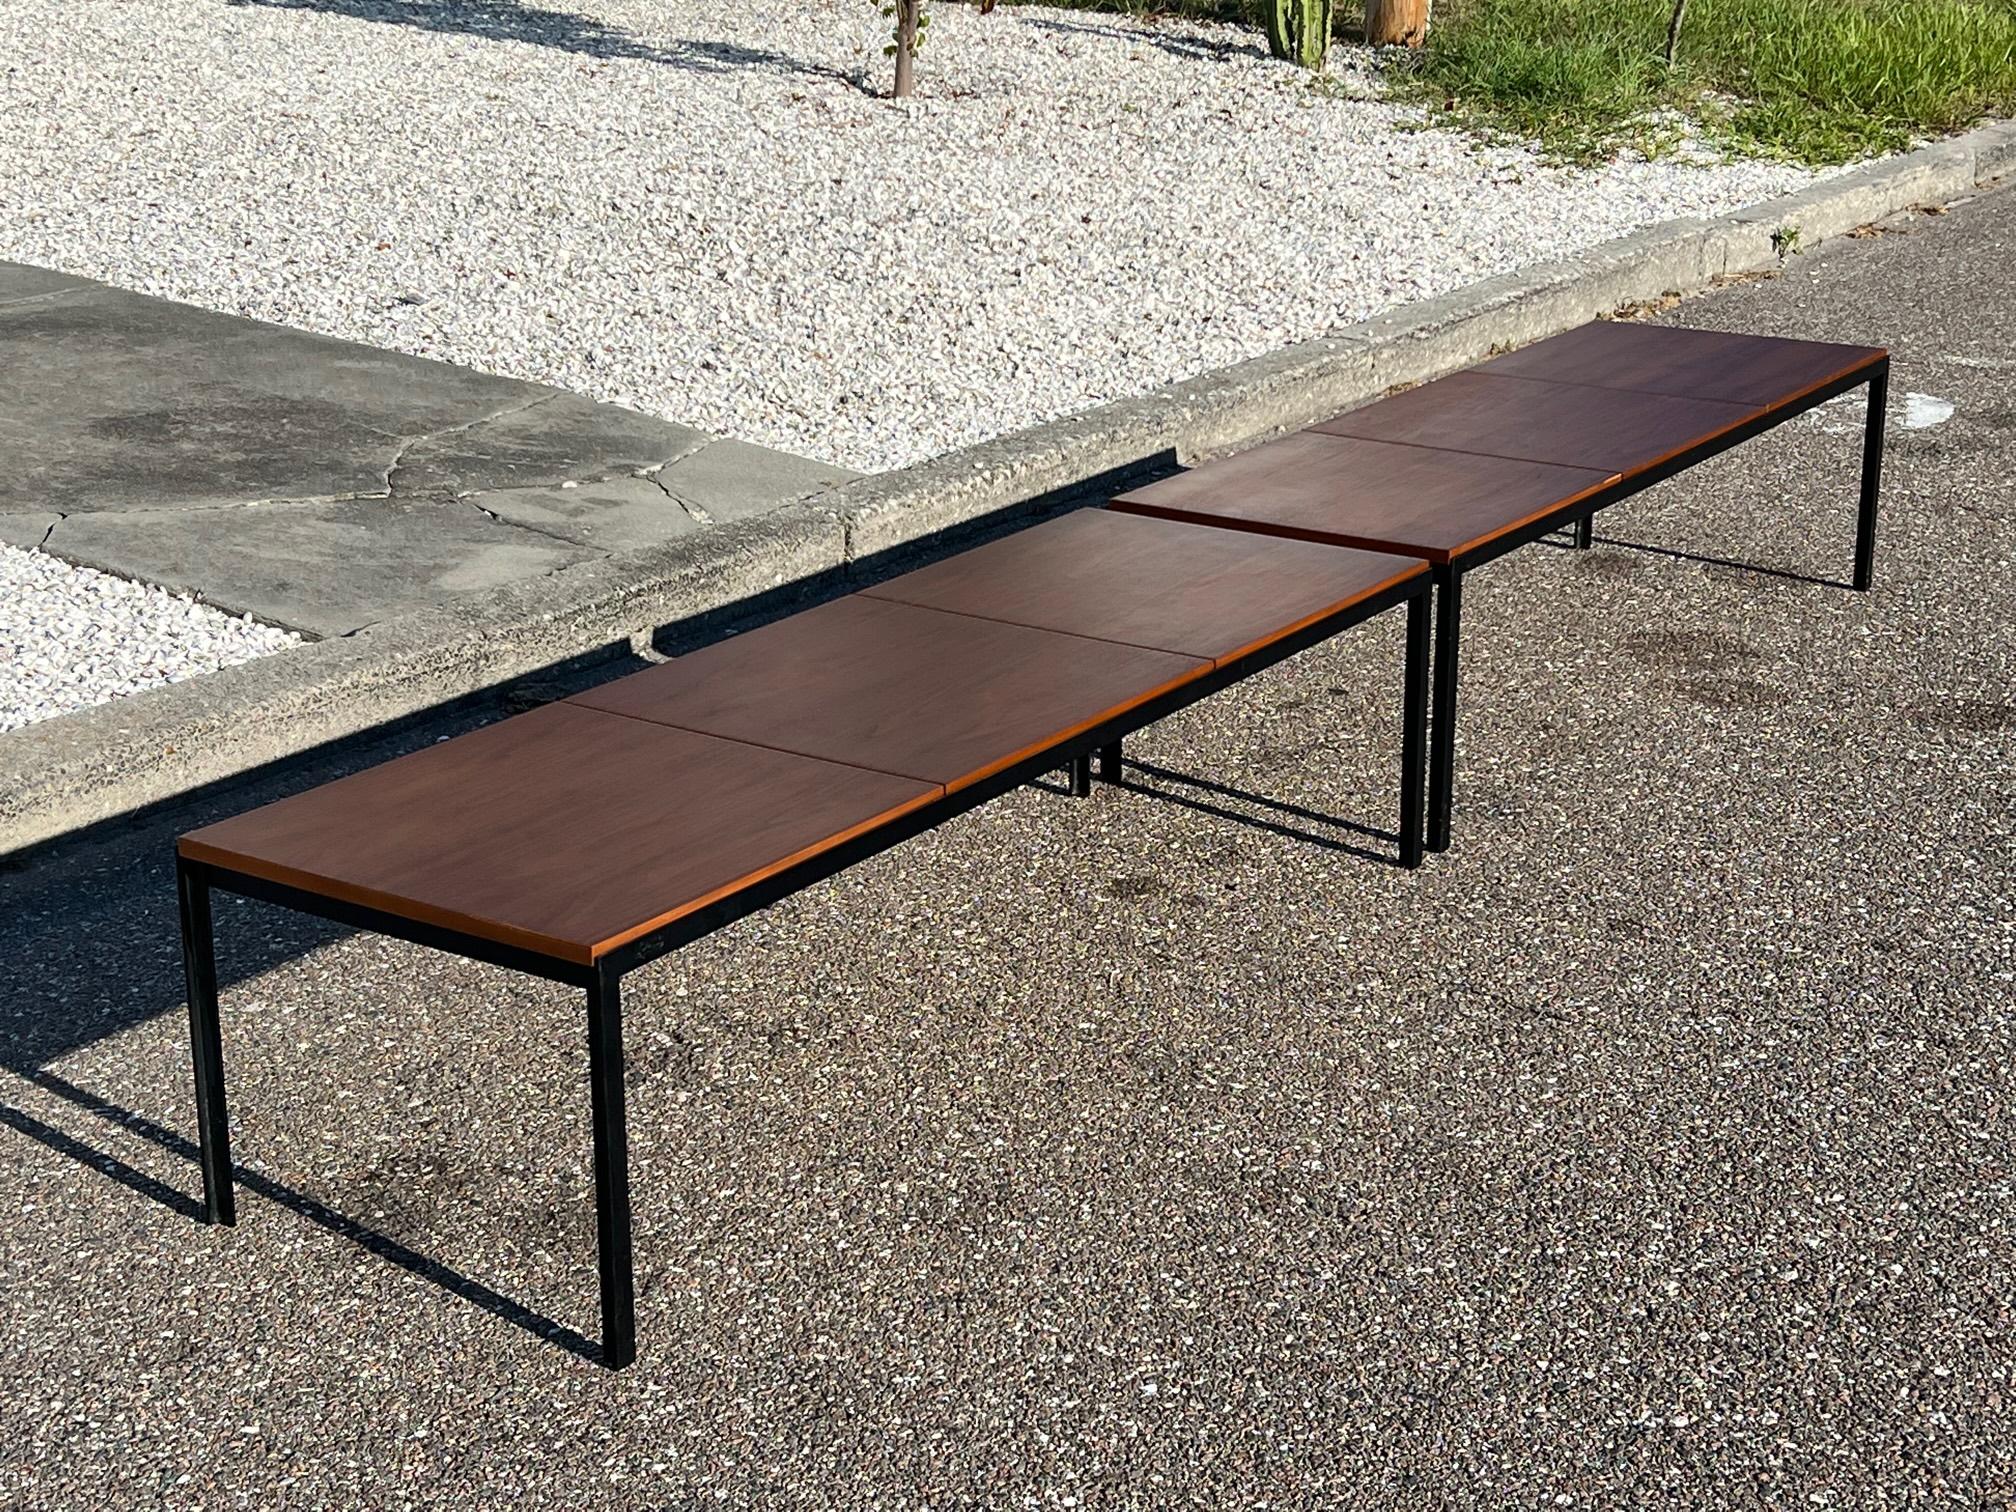 A Pair Of Florence Knoll Angle Iron Tables Or Benches In Walnut In Excellent Condition For Sale In St.Petersburg, FL